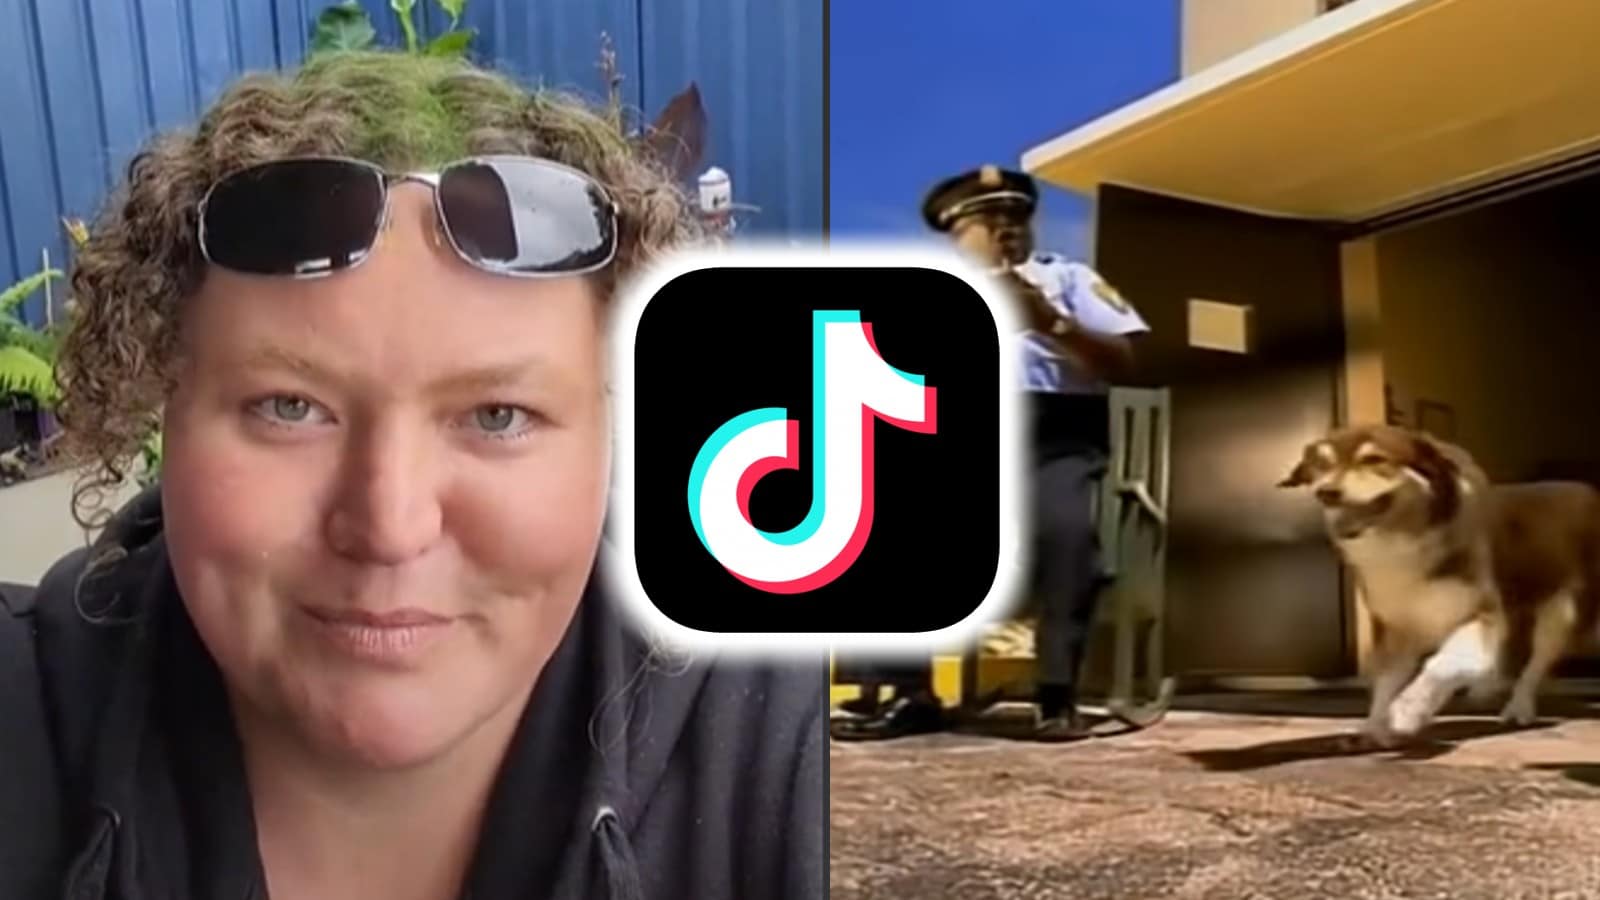 TikToker saphirejess talking to the camera with TikTok logo and screenshot from 'Who Let The Dogs Out' music video